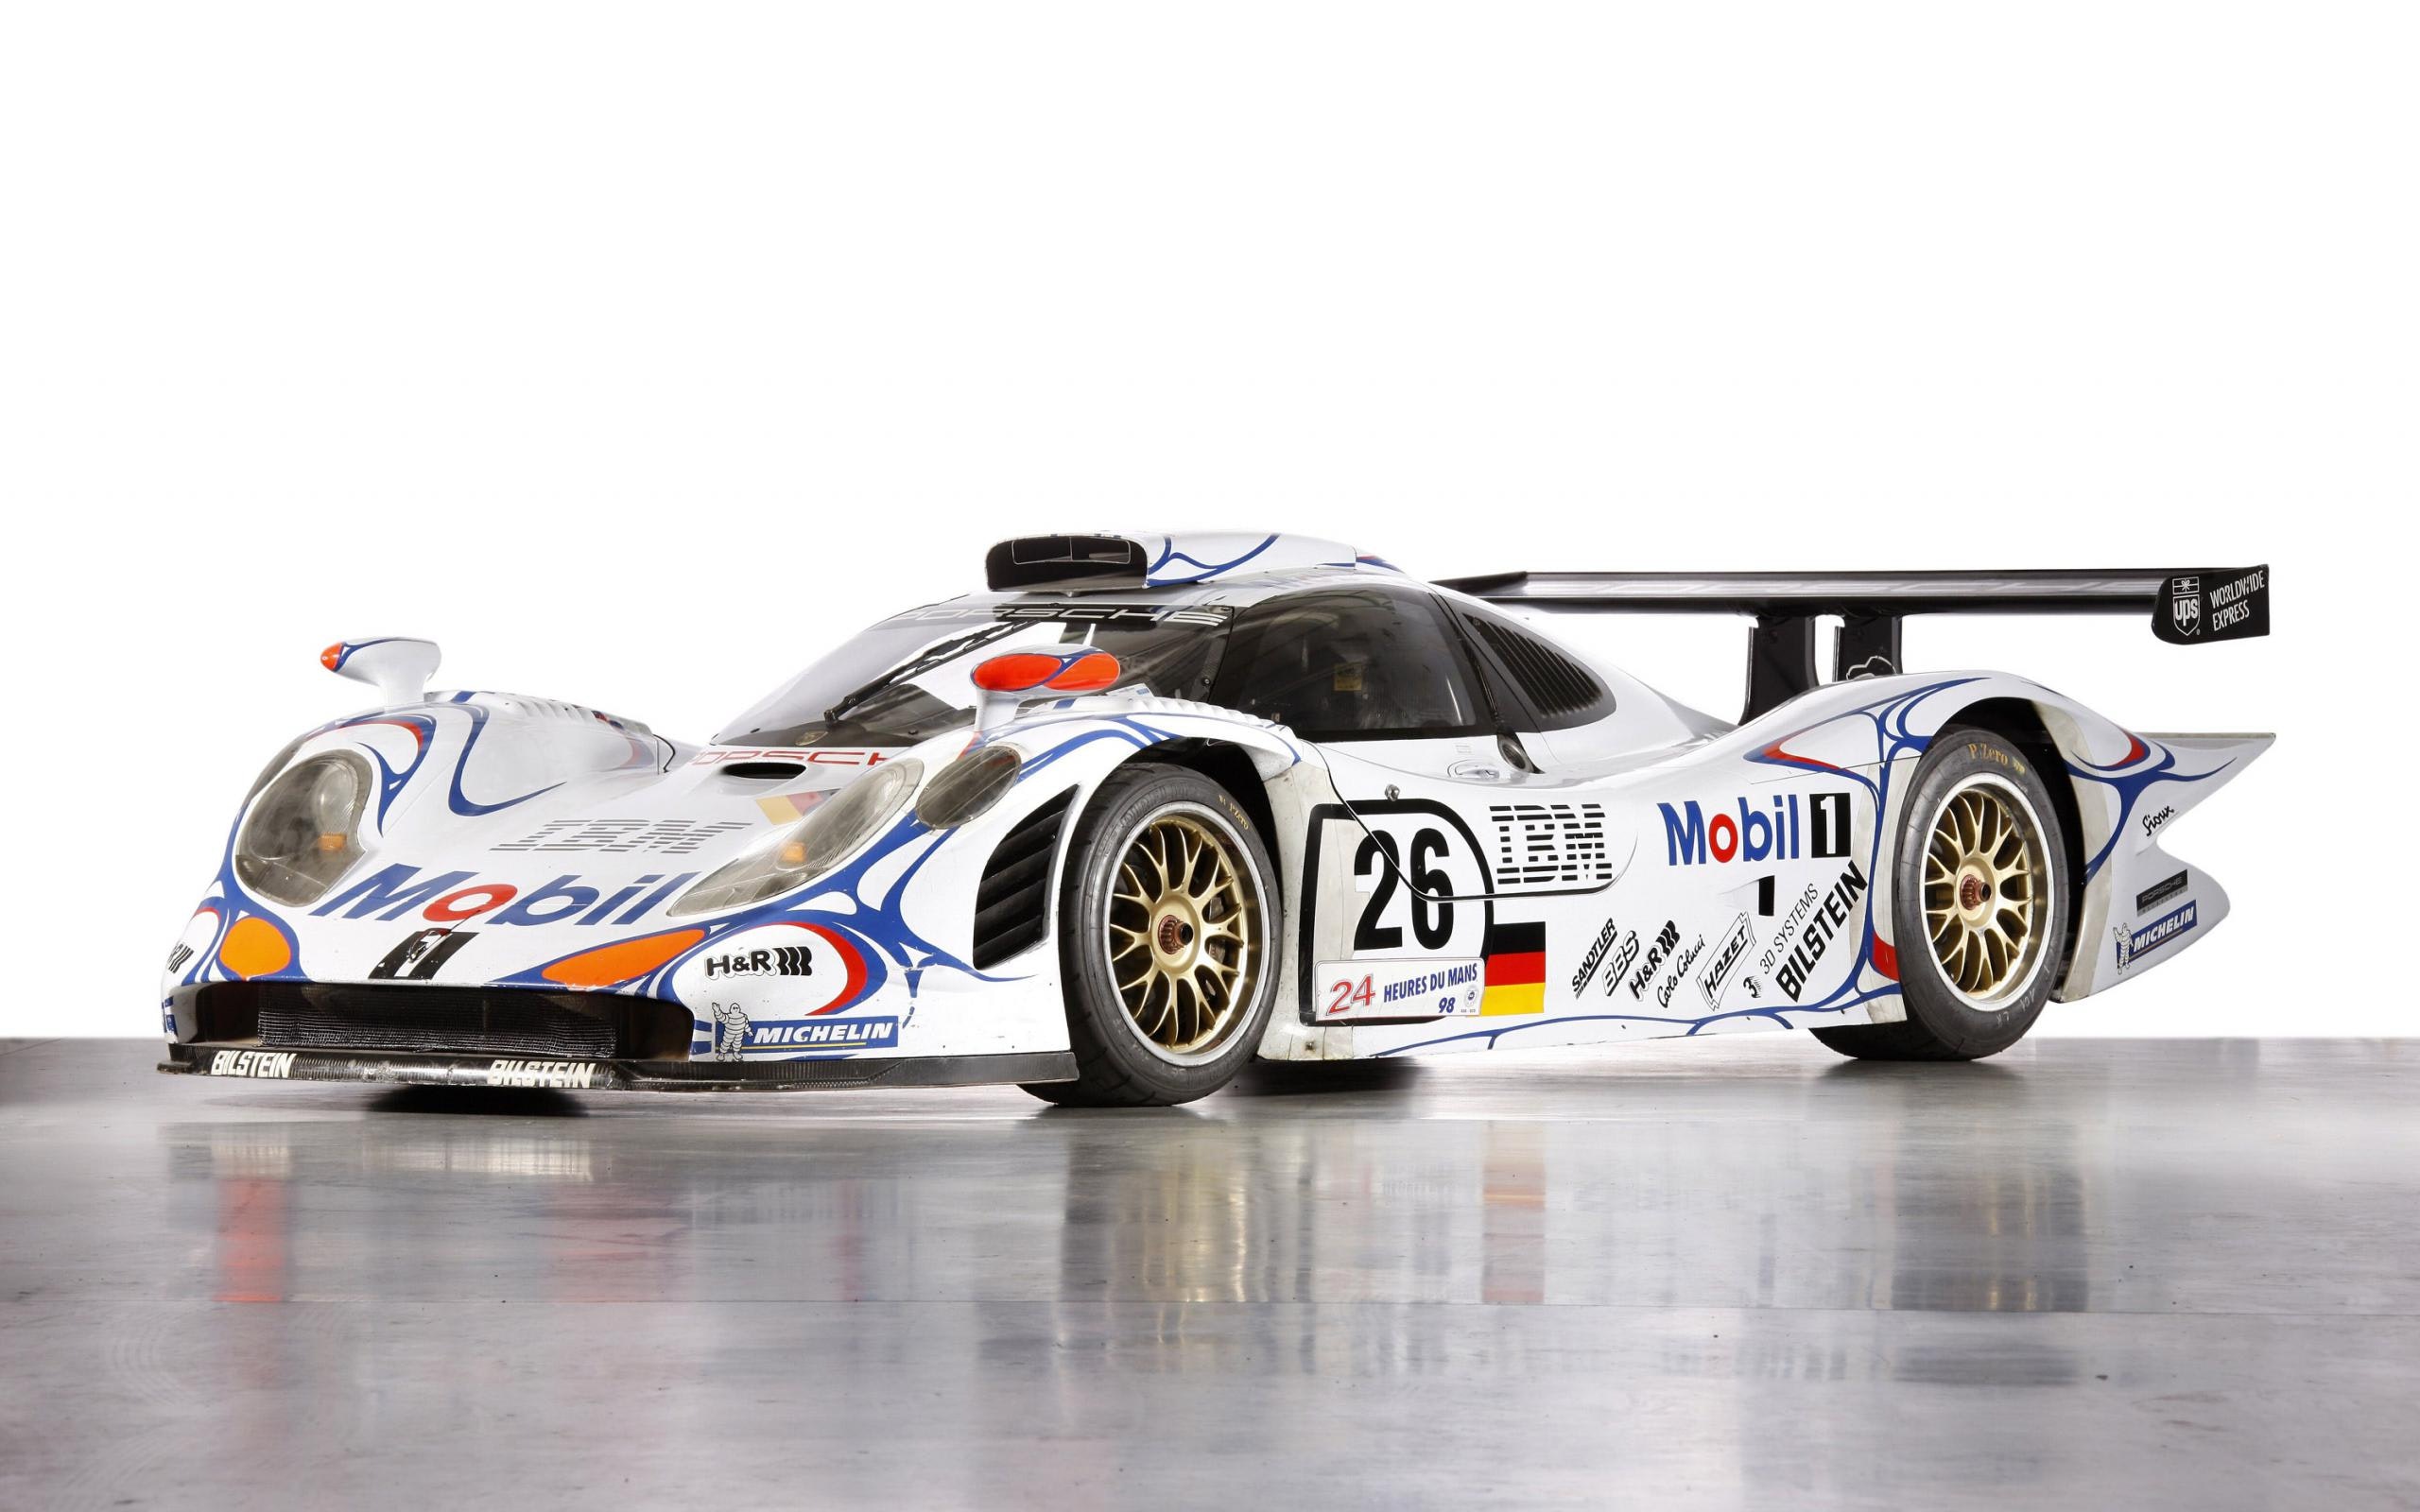 THE PORSCHE 911 GT1: THE ULTIMATE 911